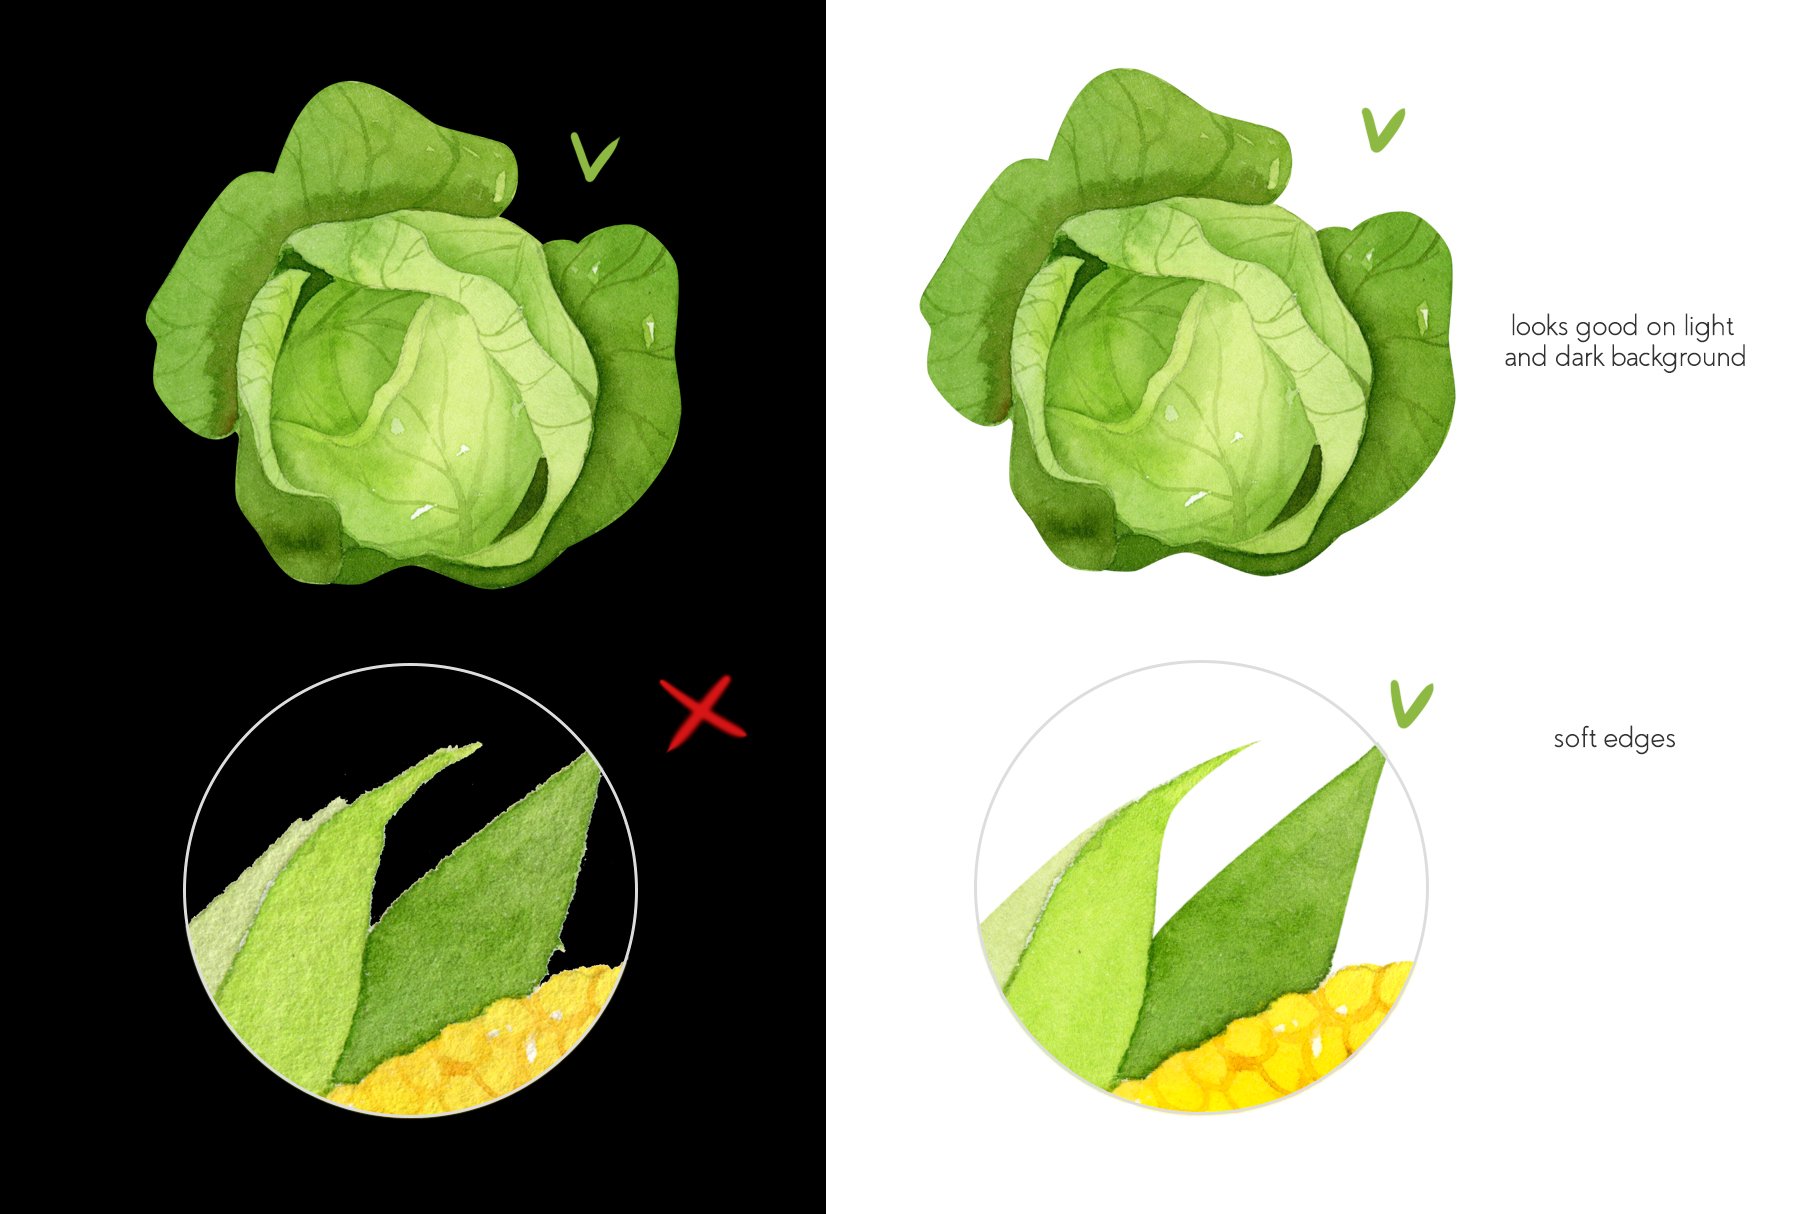 Dark and light background versions with a lettuce.